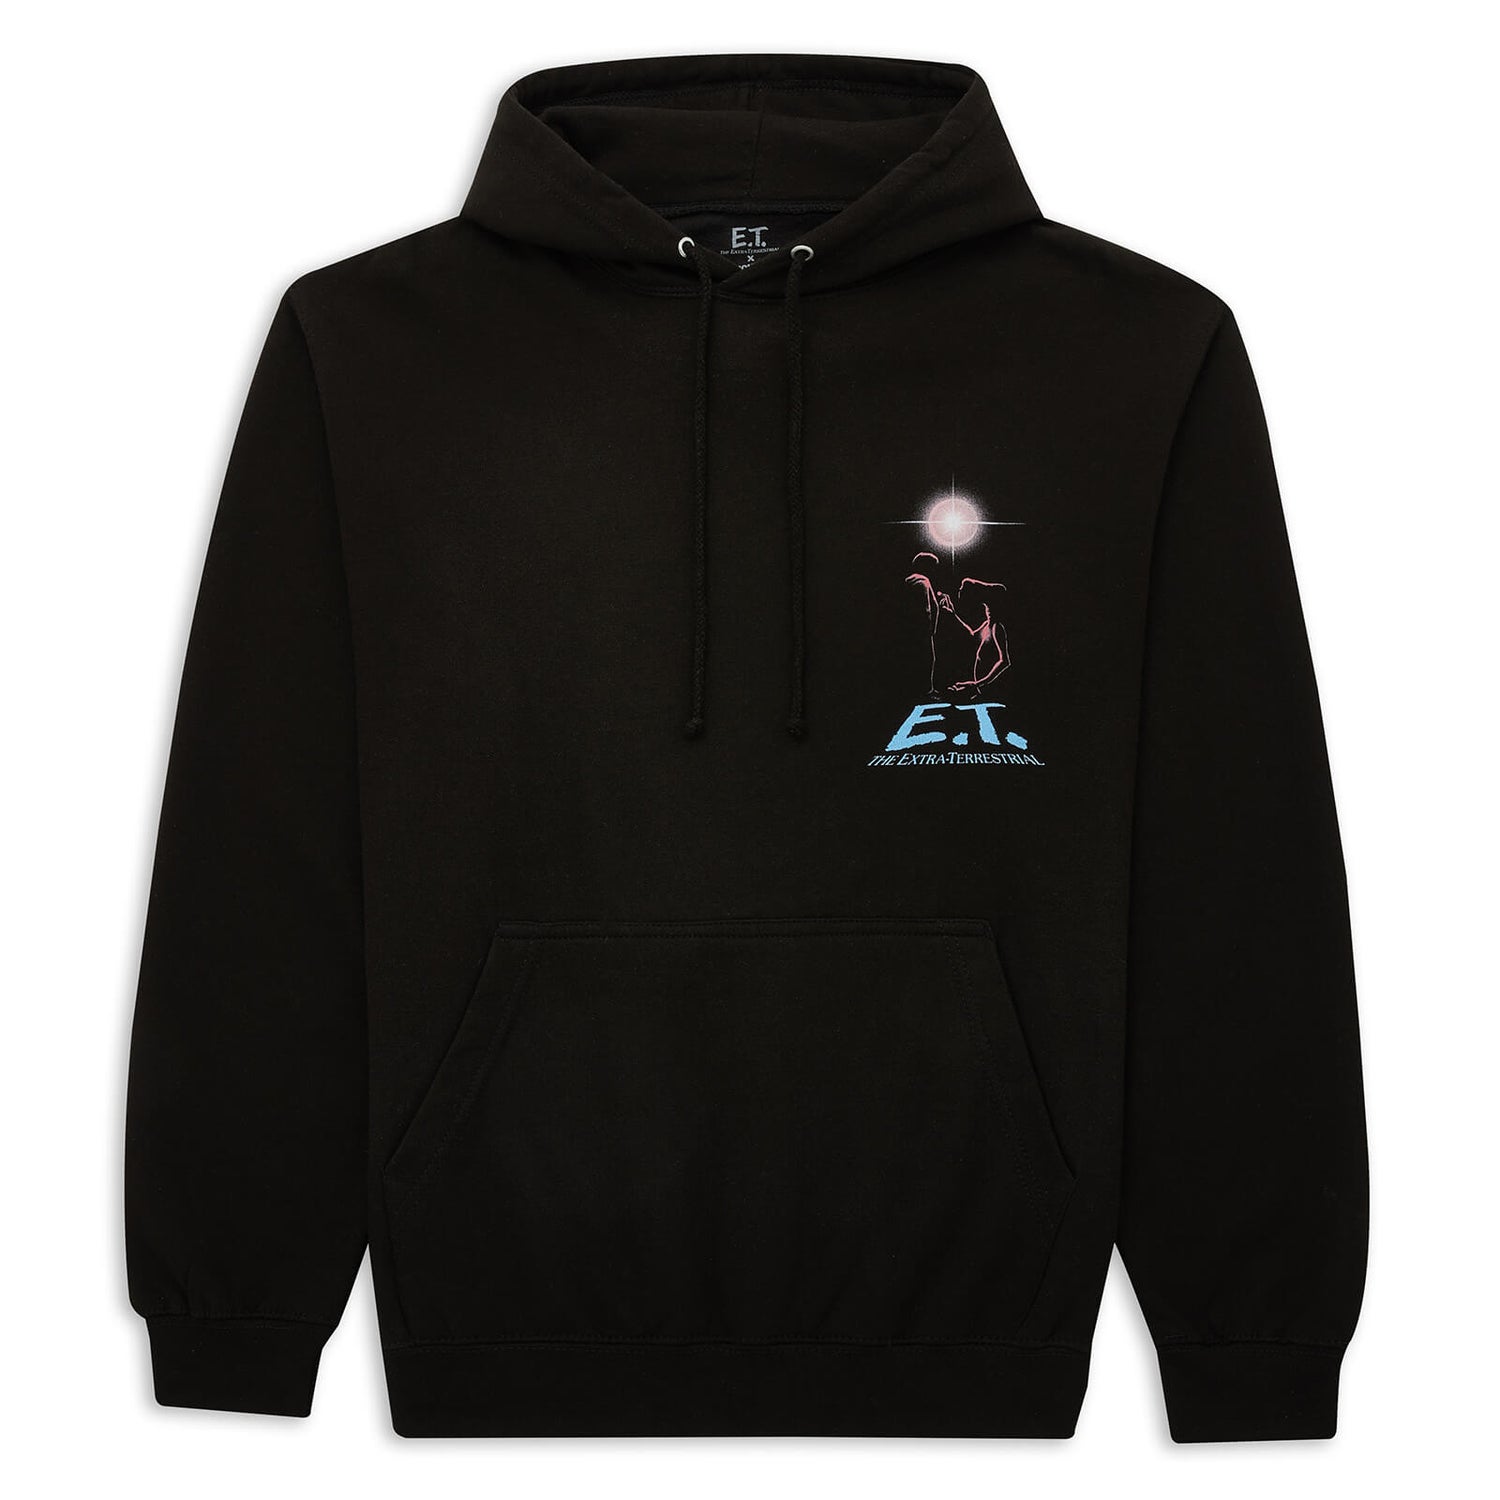 E.T. The Extra-Terrestrial X Ghoulish Silhouette Hoodie - Black